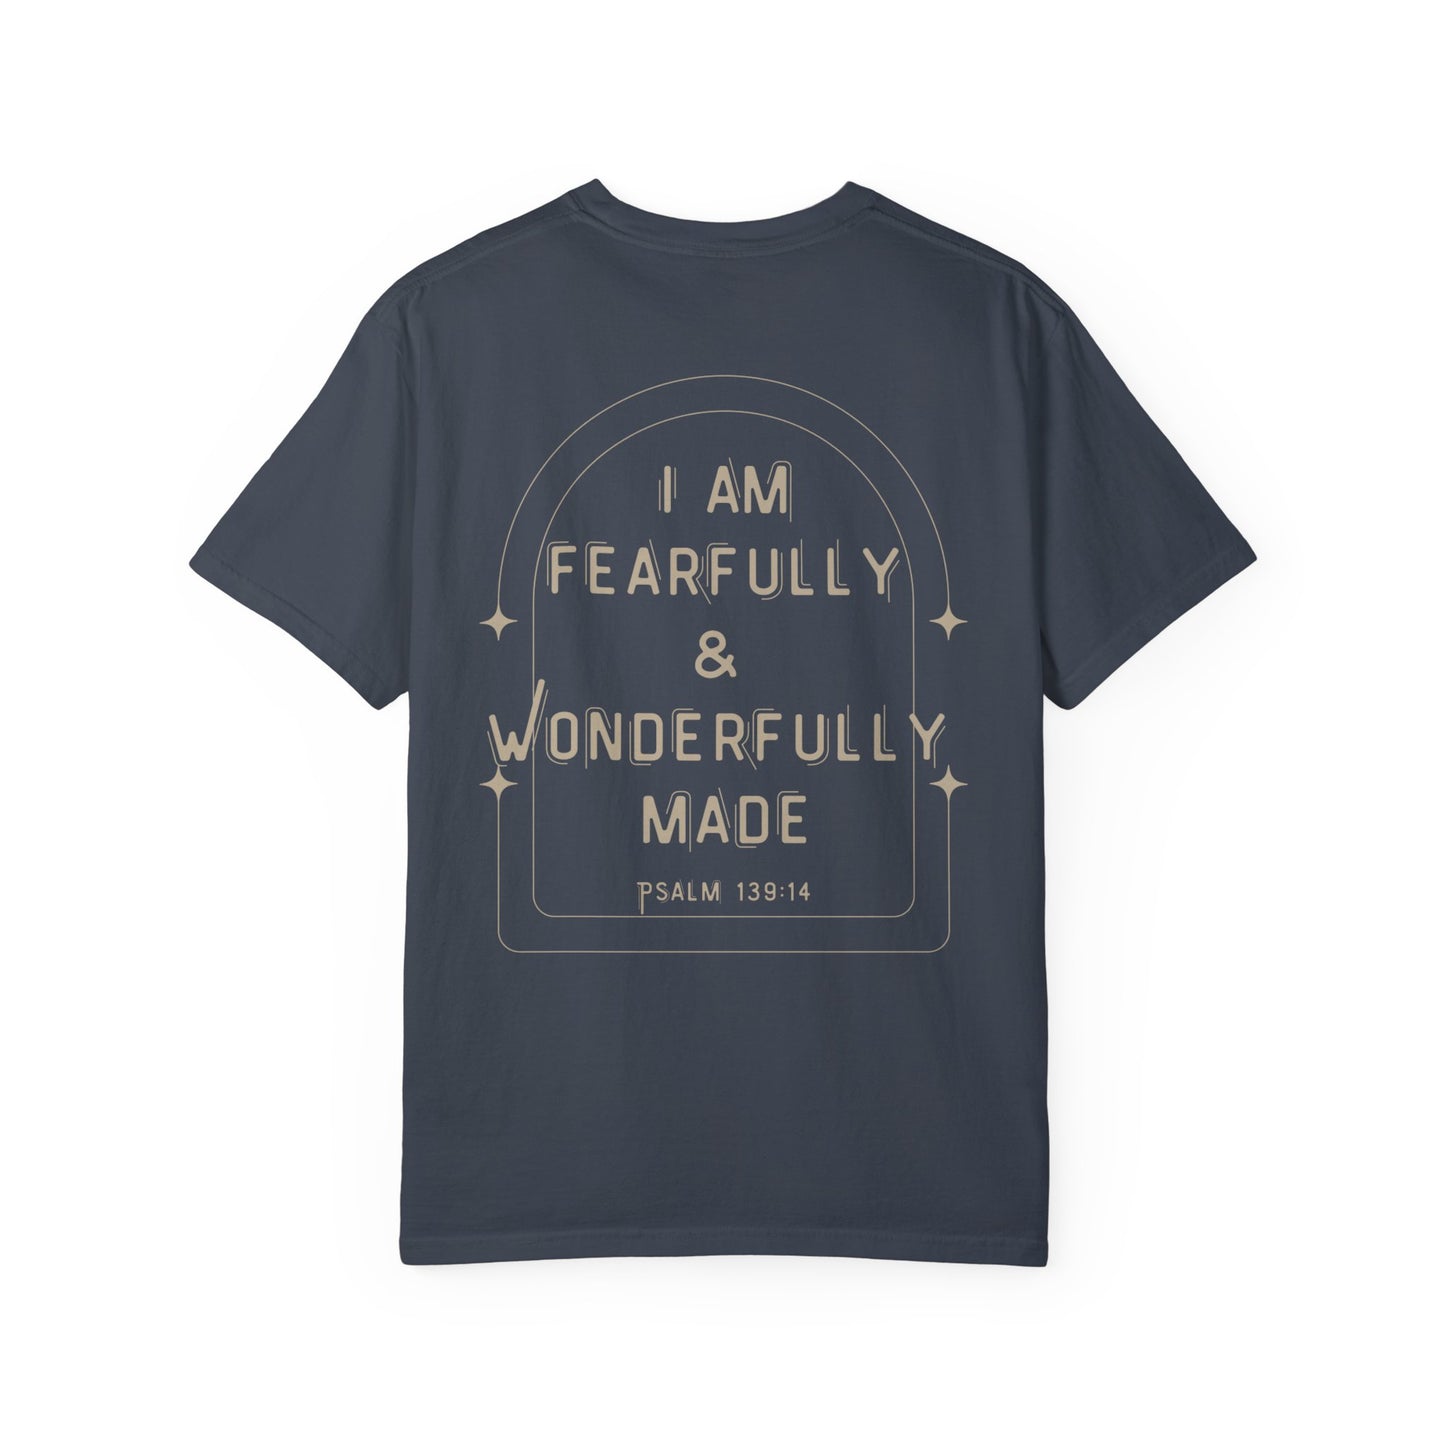 I am Fearfully and Wonderfully Made Psalm 139:14 Bible Verse Quote Christian Shirt Gift for Him Her Friend Father's Day Valentine's Day